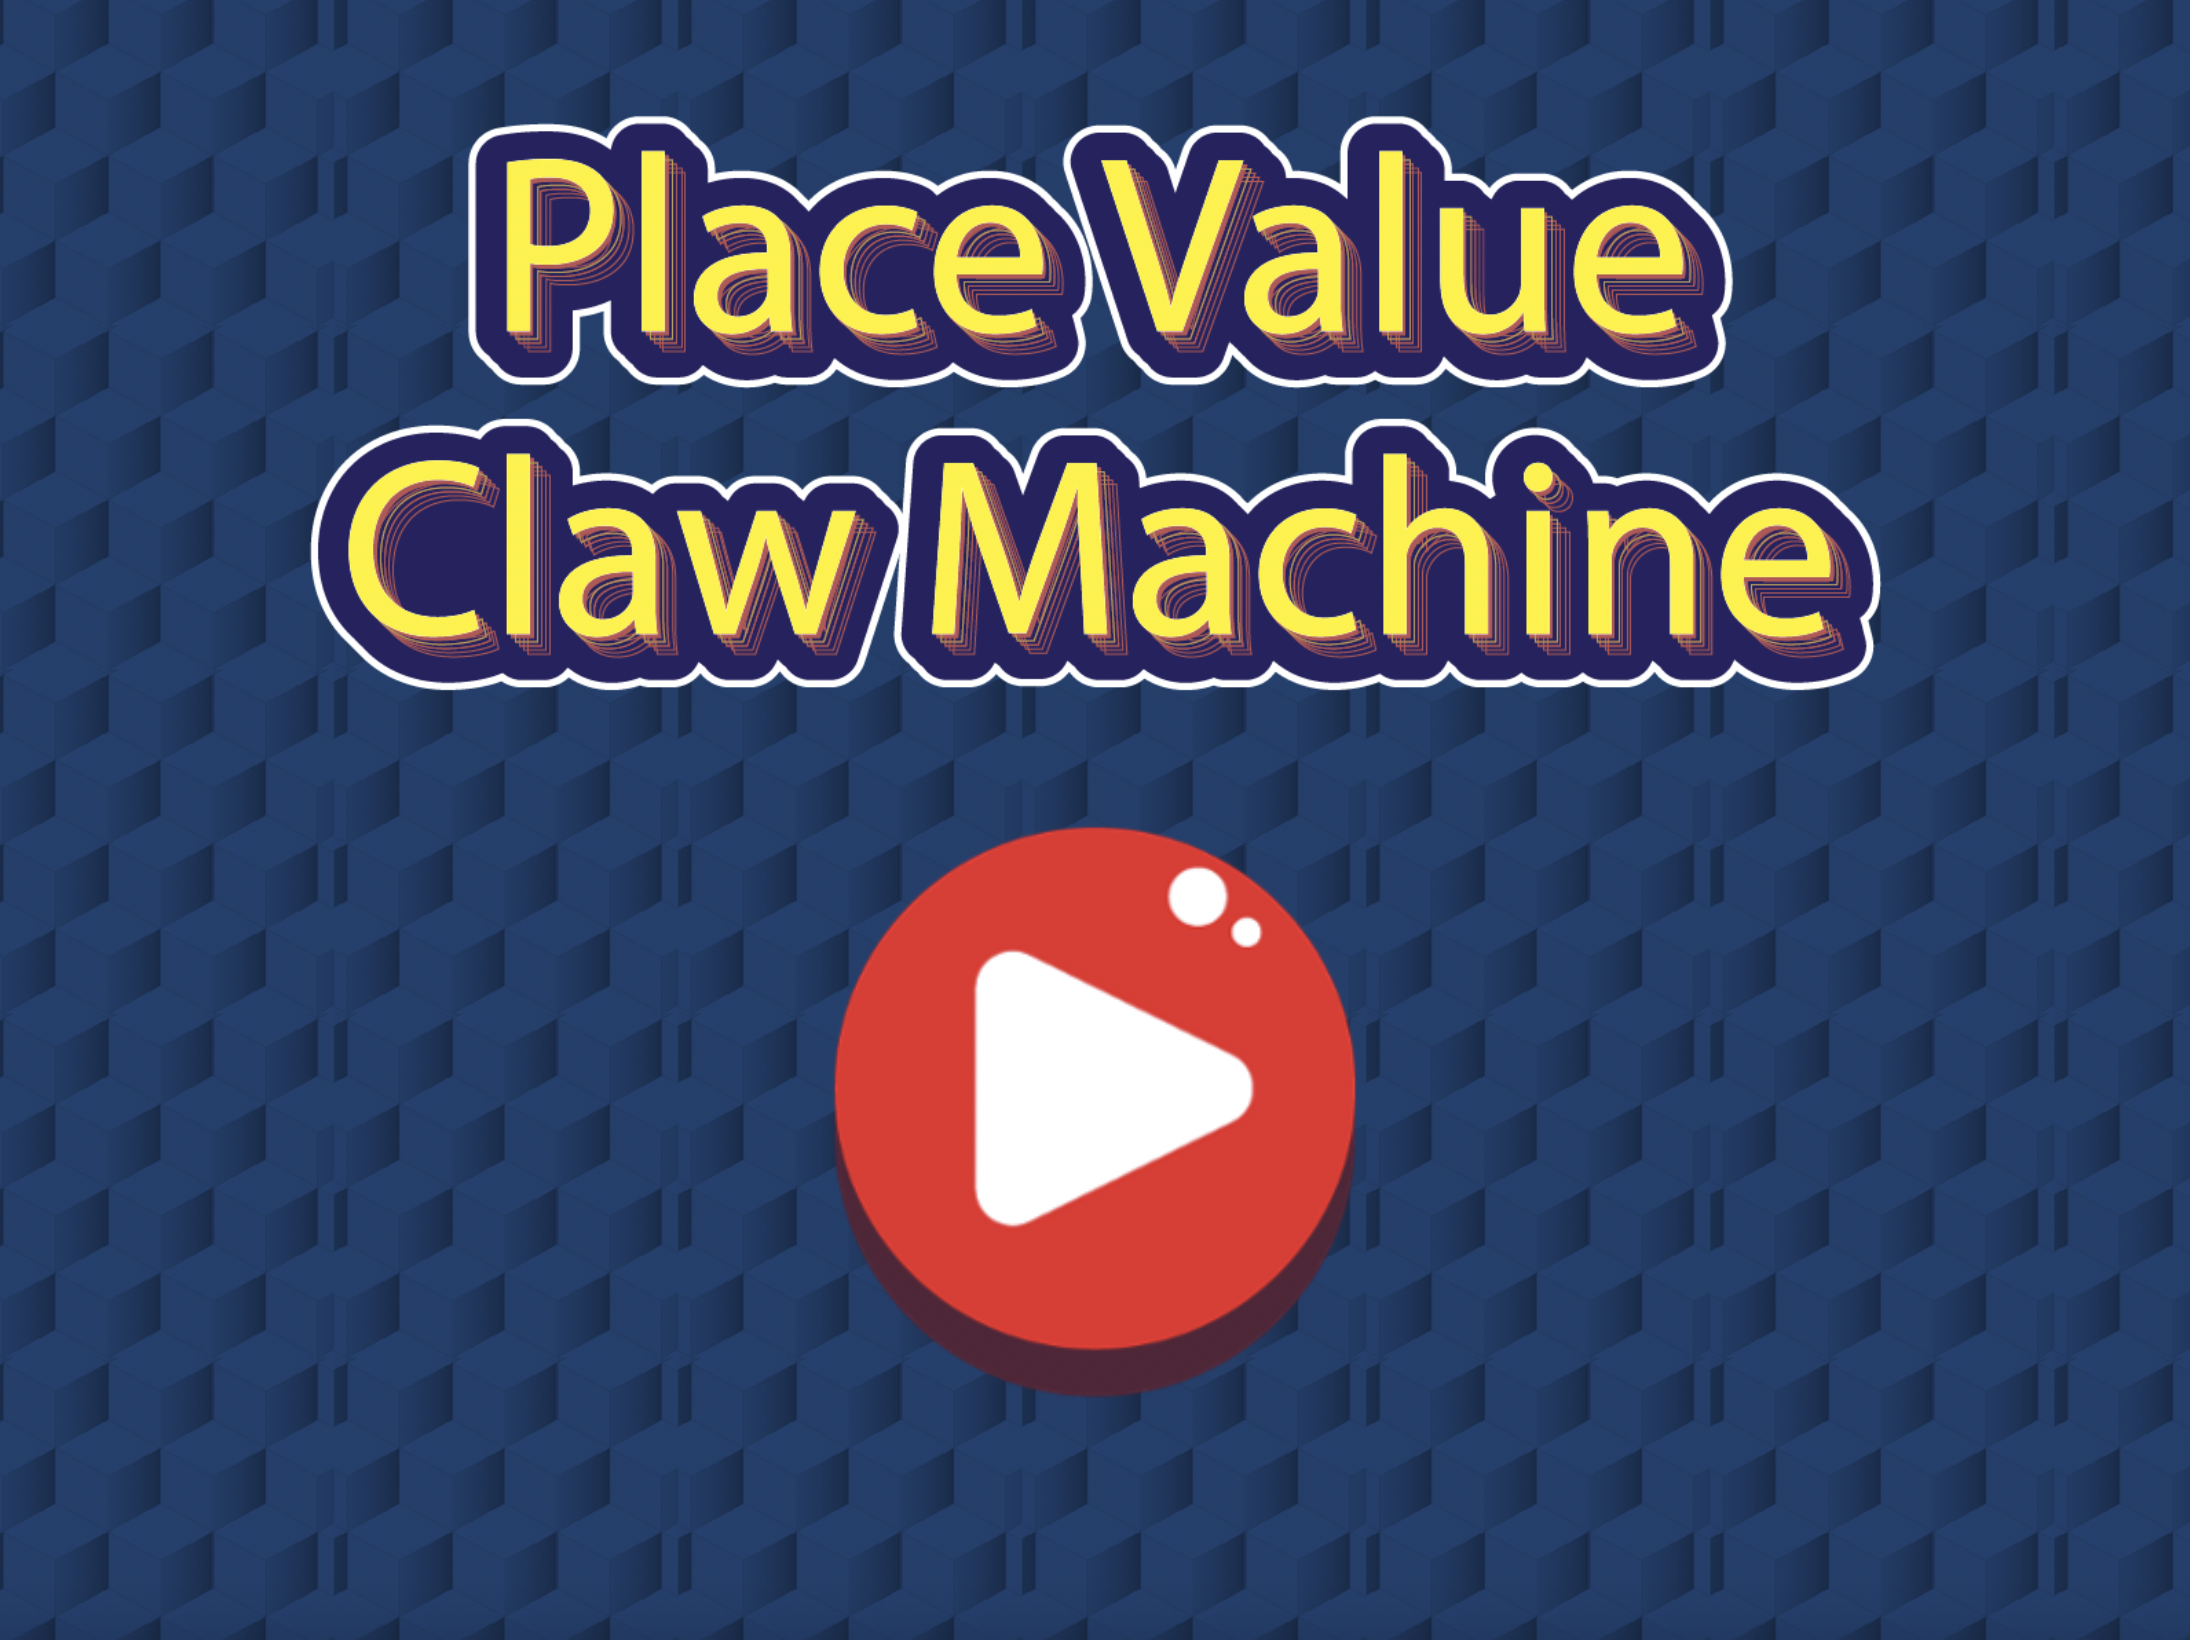 Place Value Claw Machine game